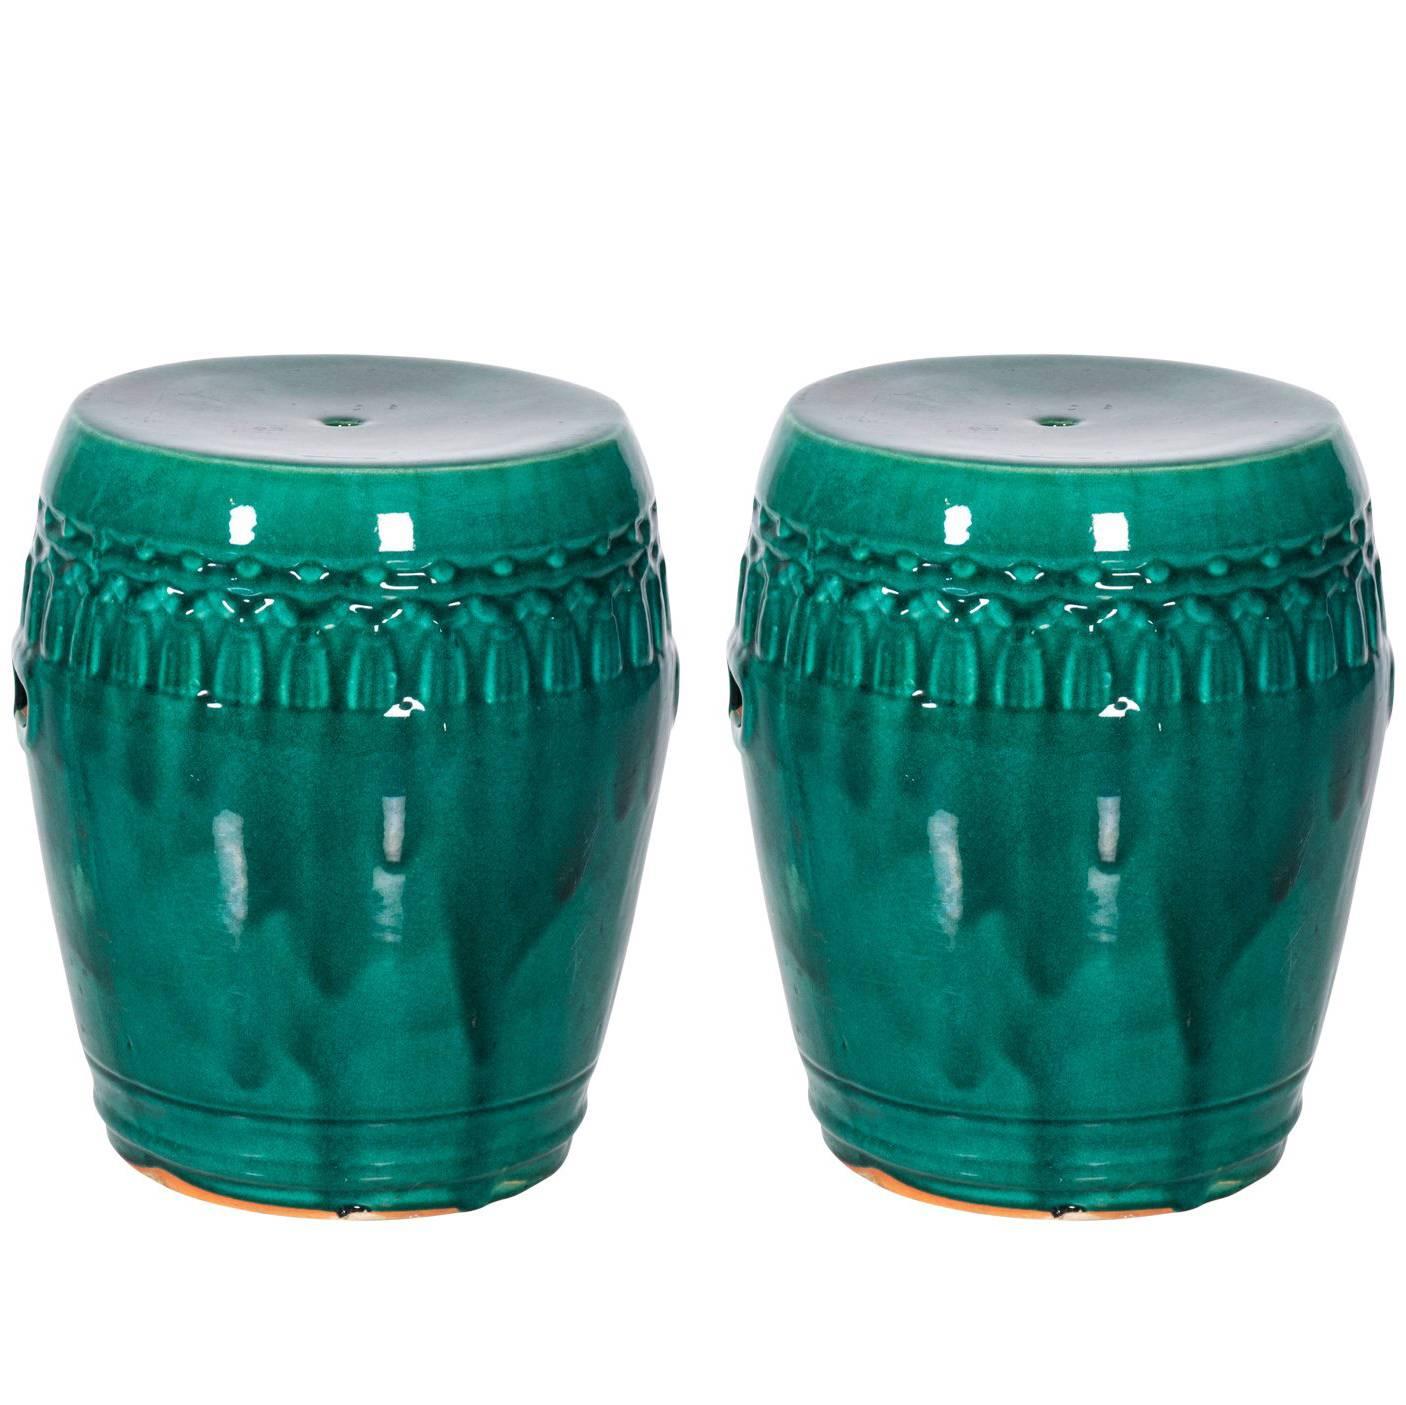 Pair of Ceramic Turquoise Green Garden Seats For Sale